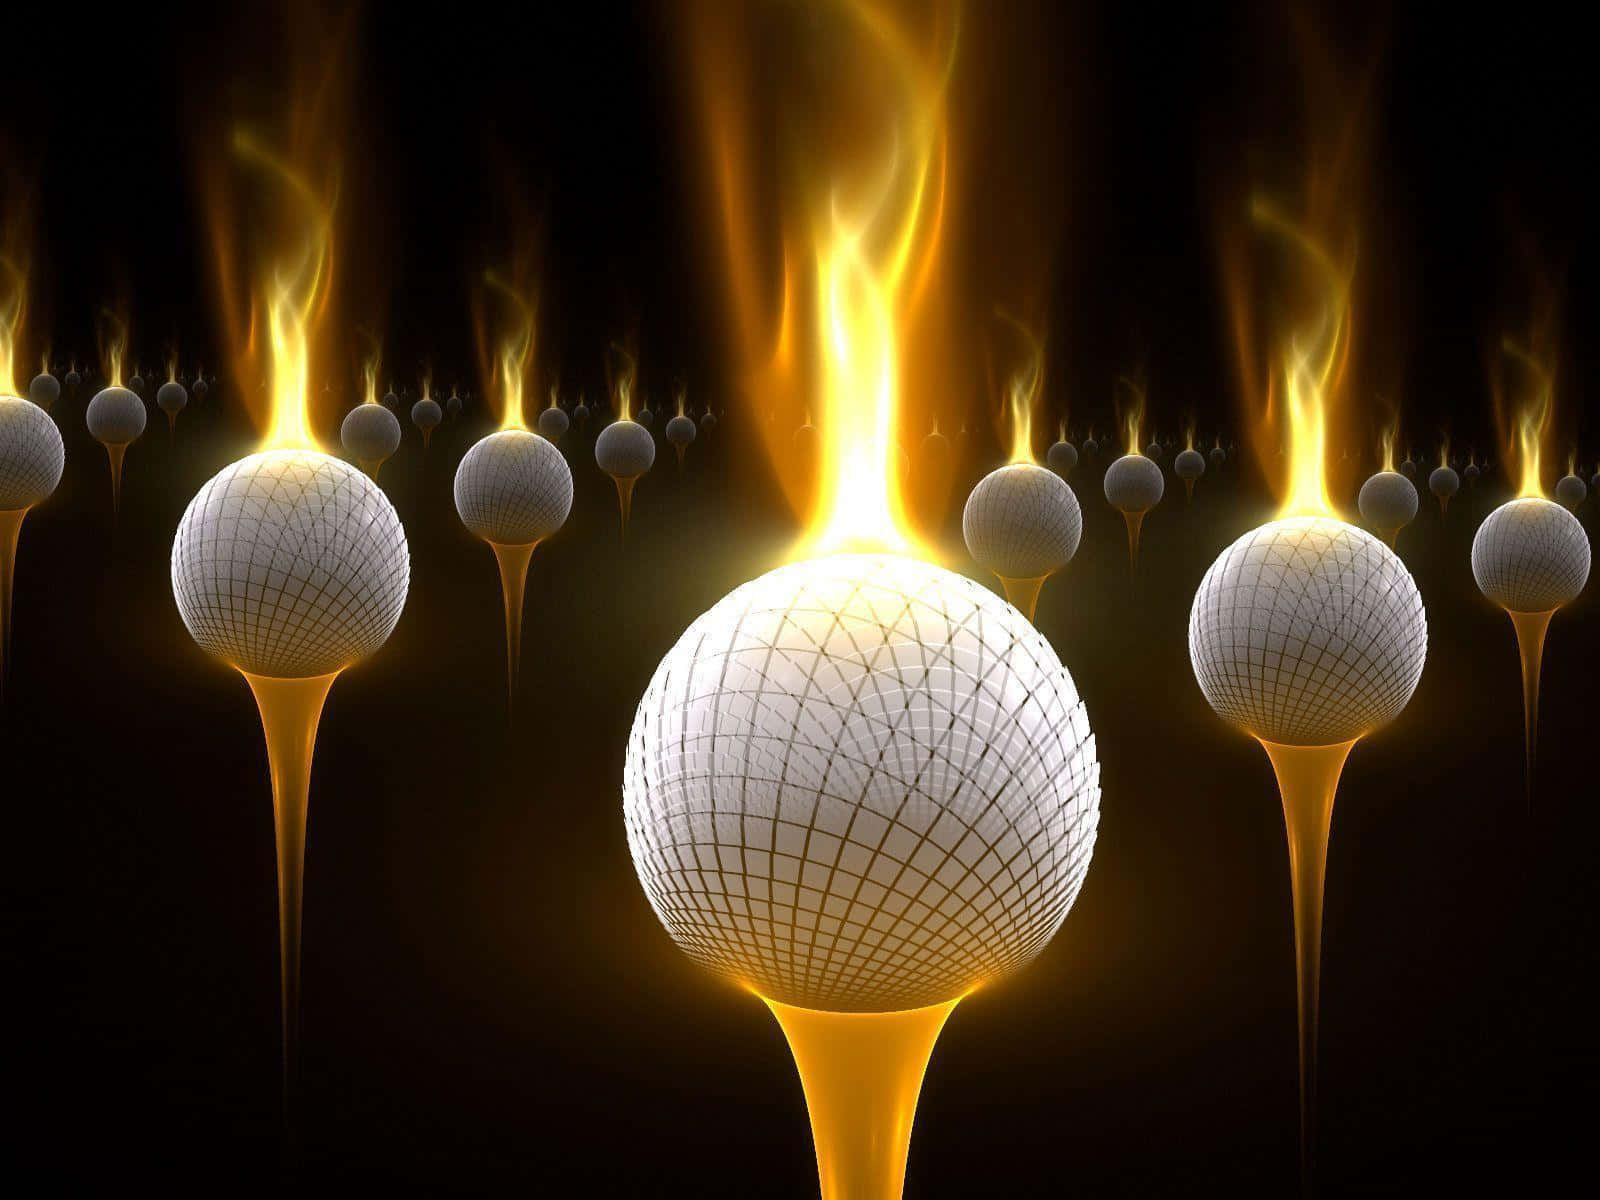 A Group Of Golf Balls With Flames On Them Wallpaper